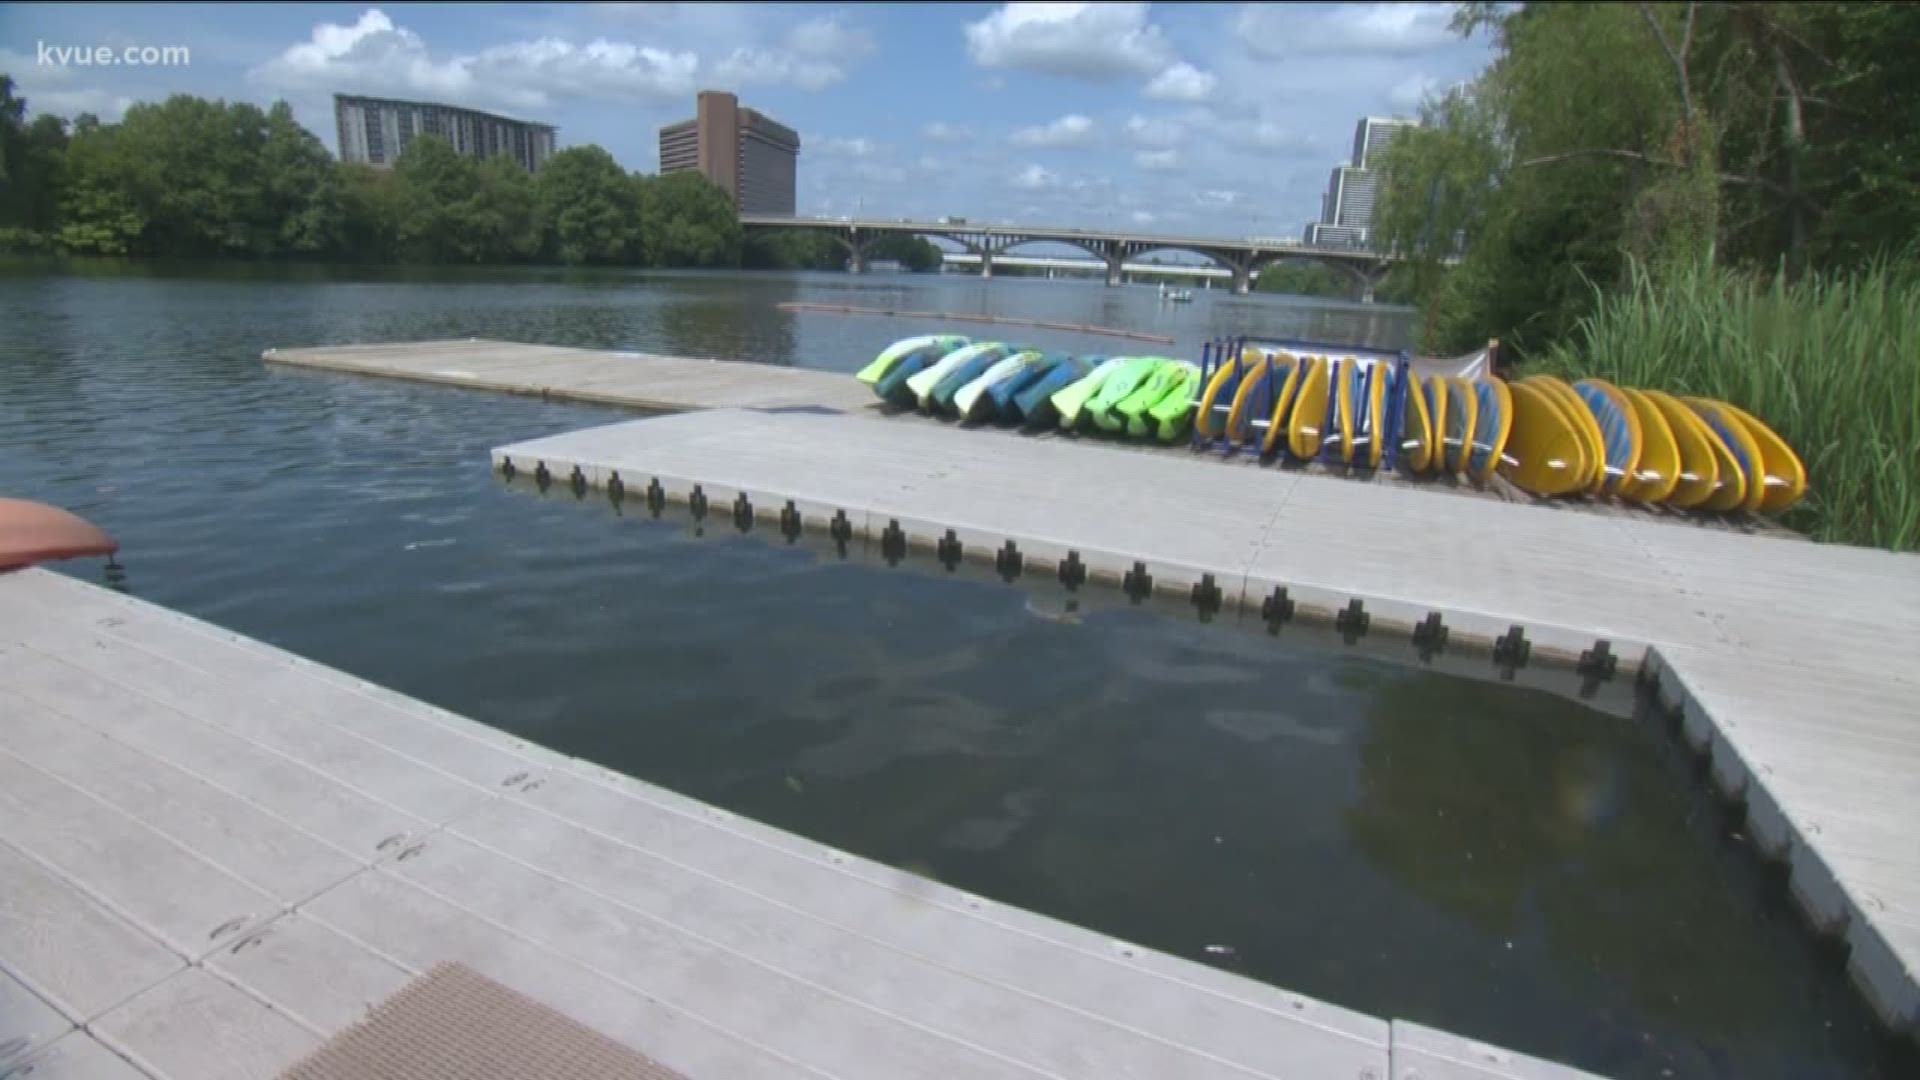 Recreational businesses on Lady Bird Lake are doing their part to warn people about toxic blue-green algae in the water.